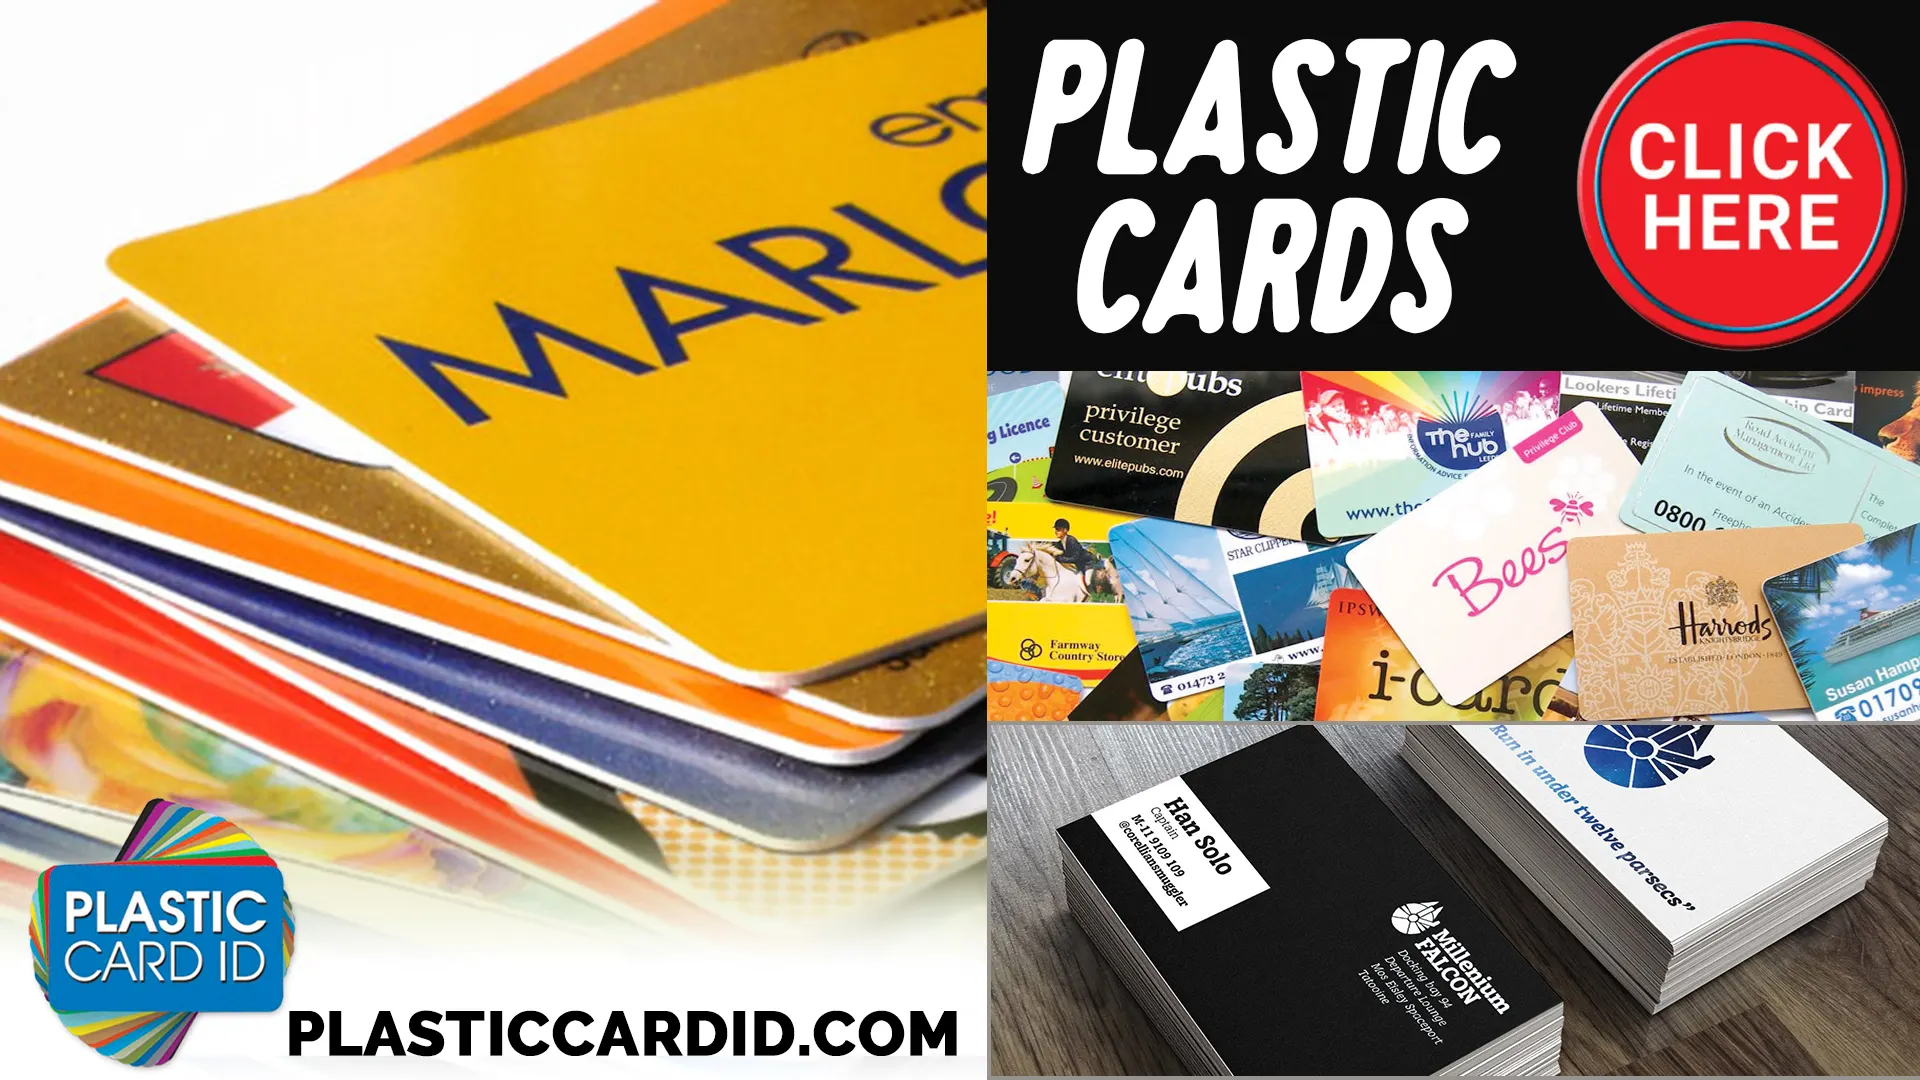 Robust and Reliable Card Print Solutions from Plastic Card ID
